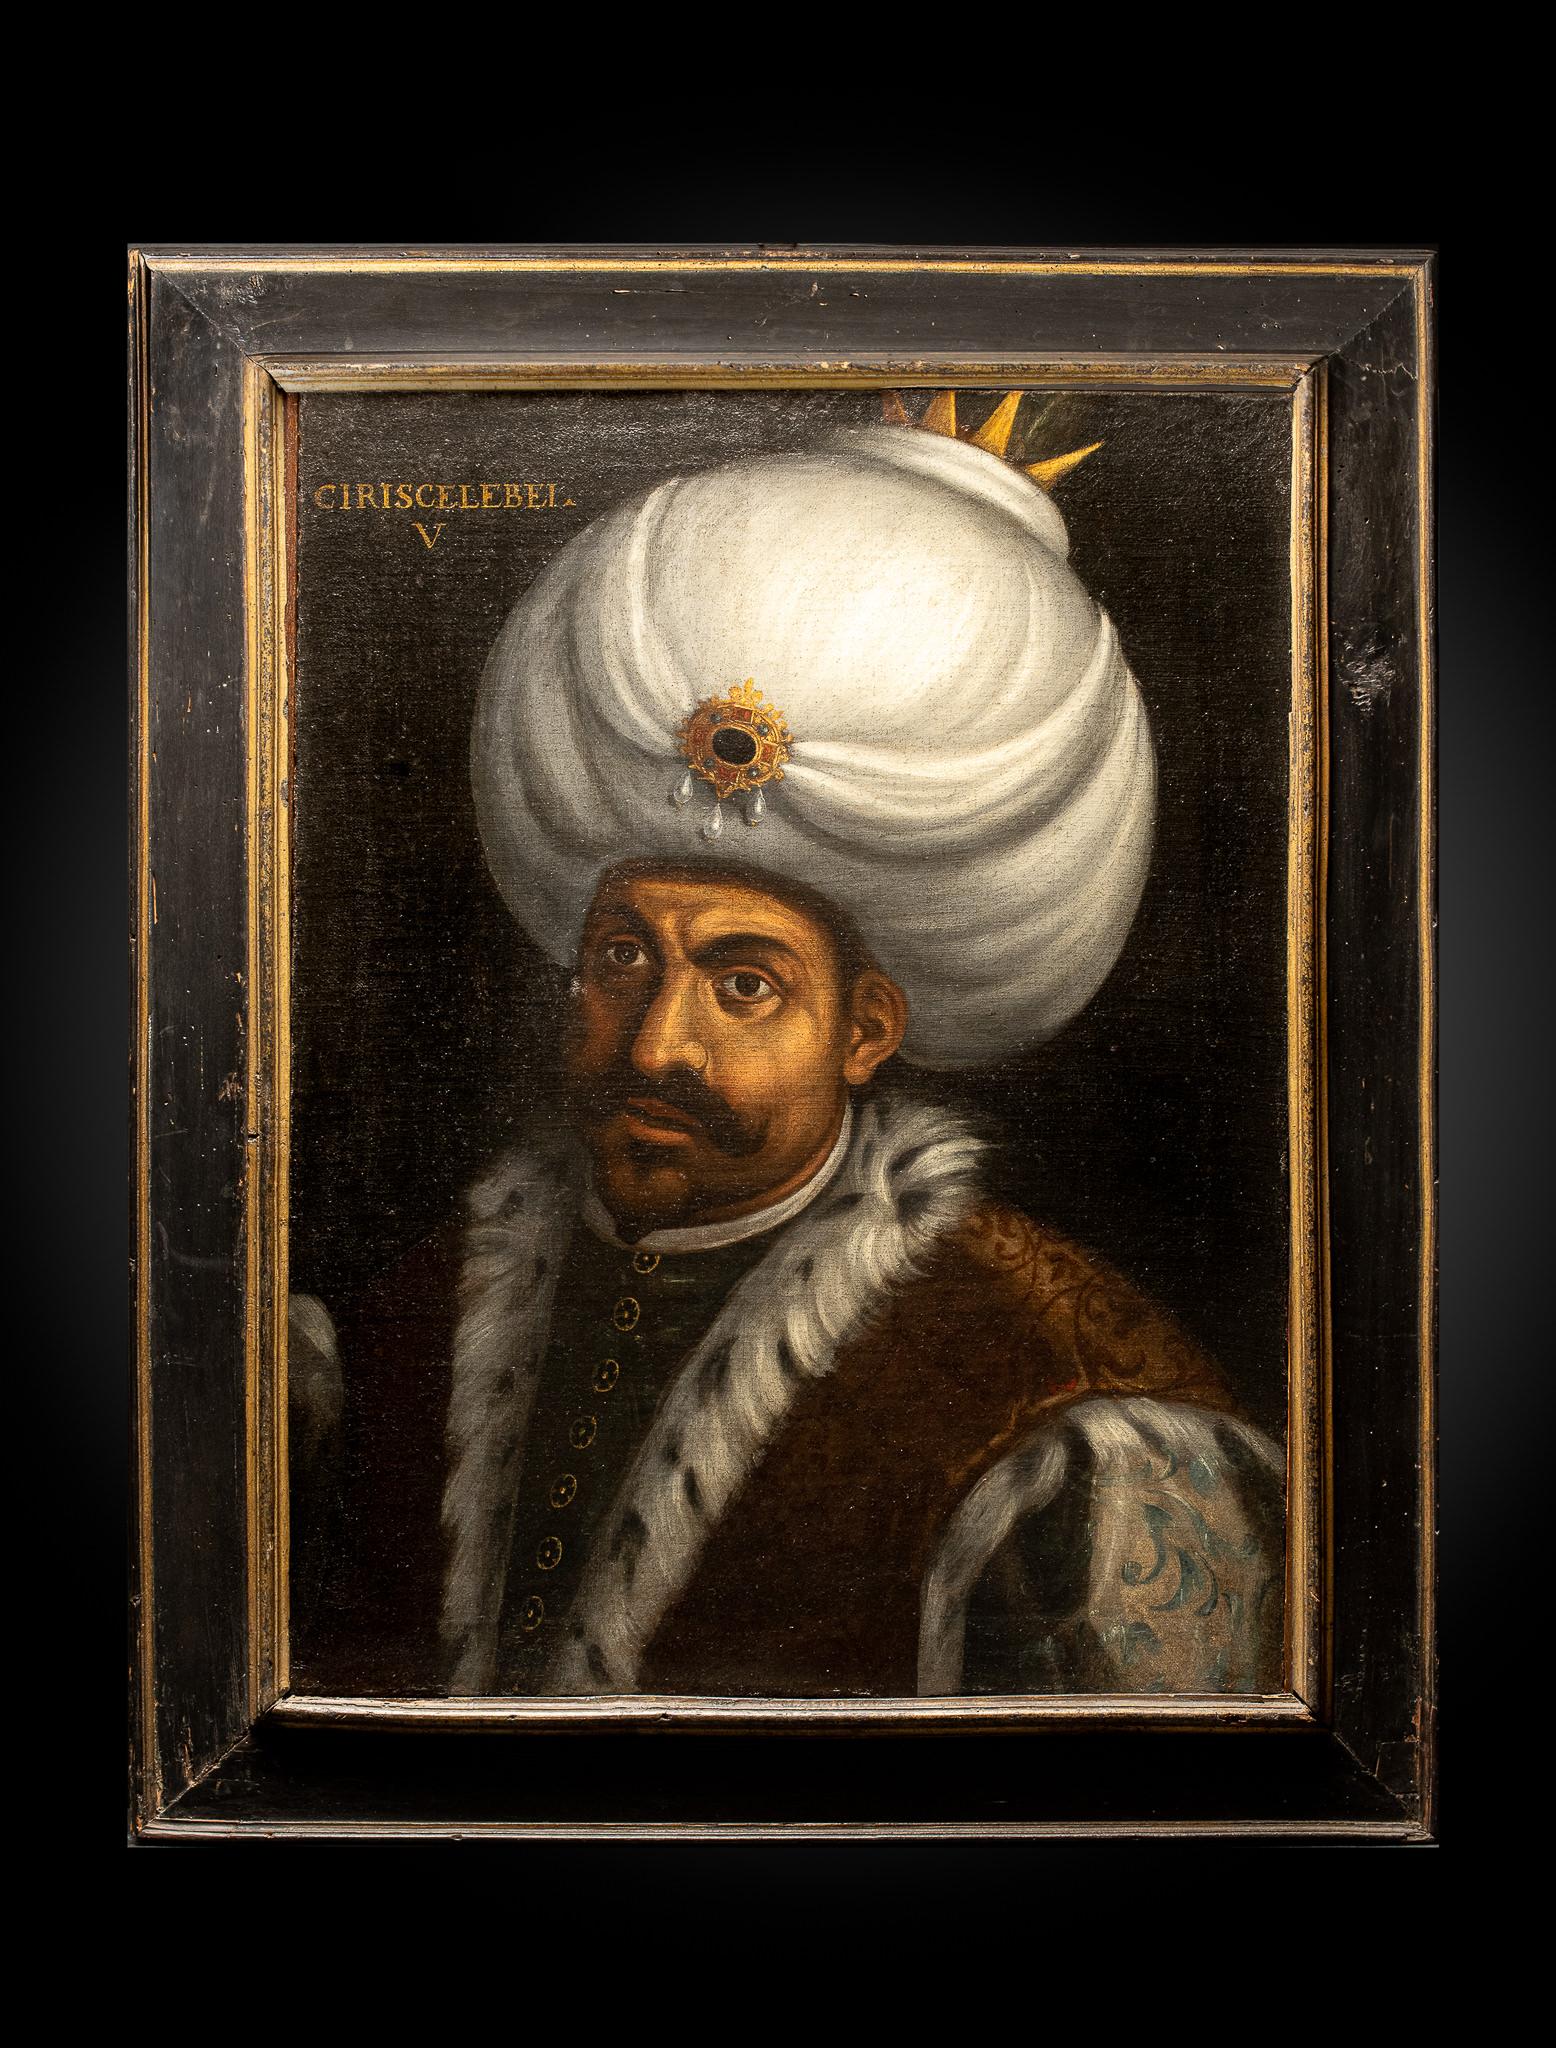 Hand-Painted Pair of 16th C Portraits of Turkish Ottoman Sultans, follower of Paolo Veronese. For Sale